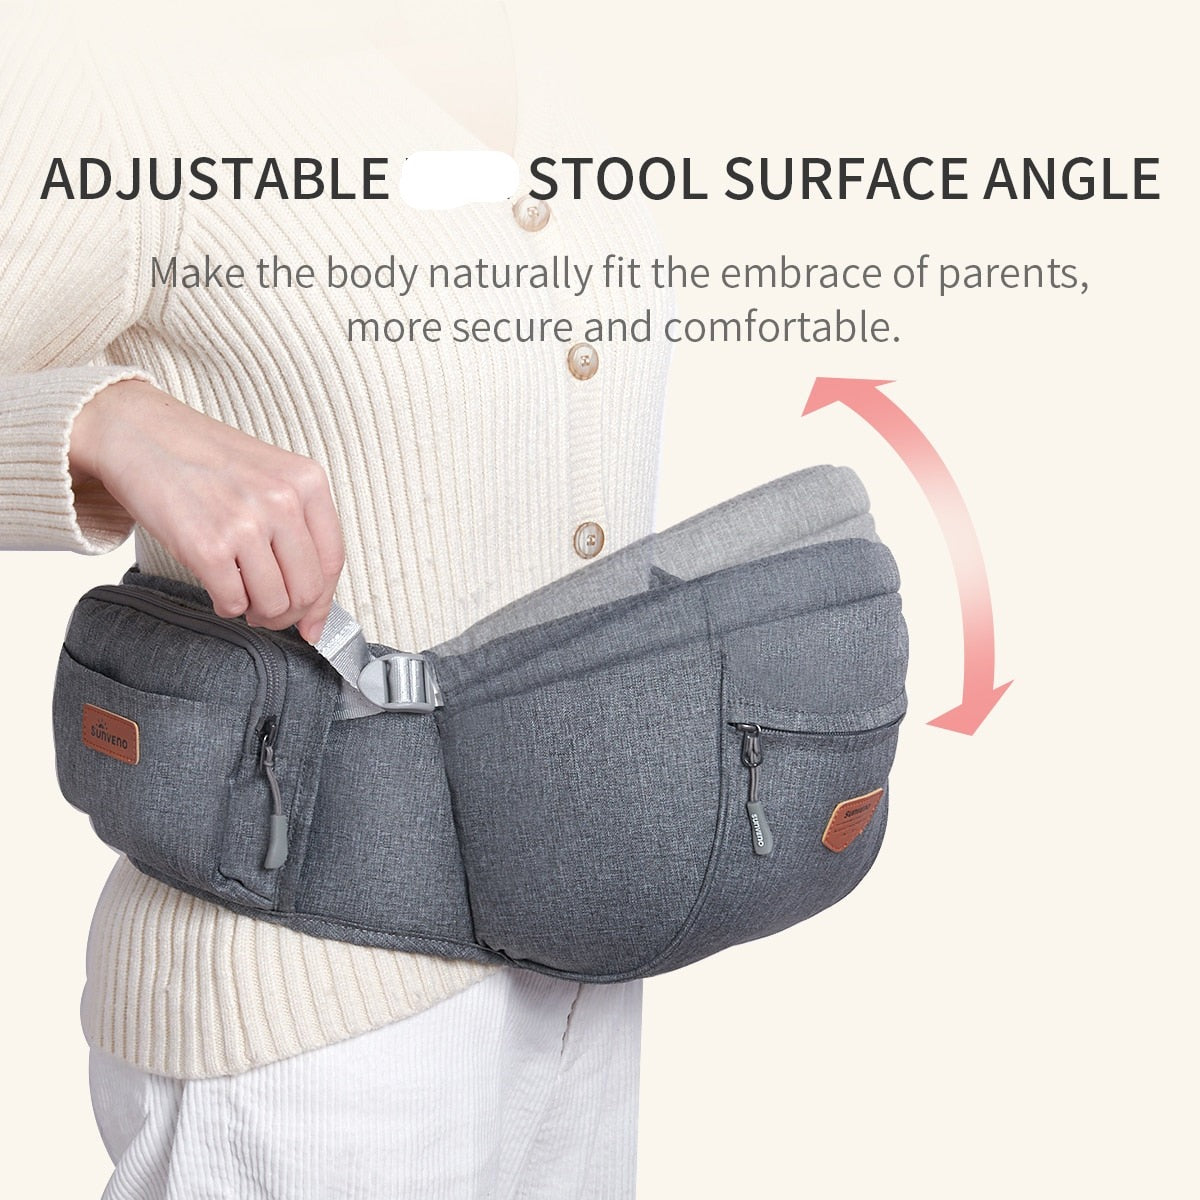 baby carrier with adjustable stool angle to help your baby sit comfy and safe